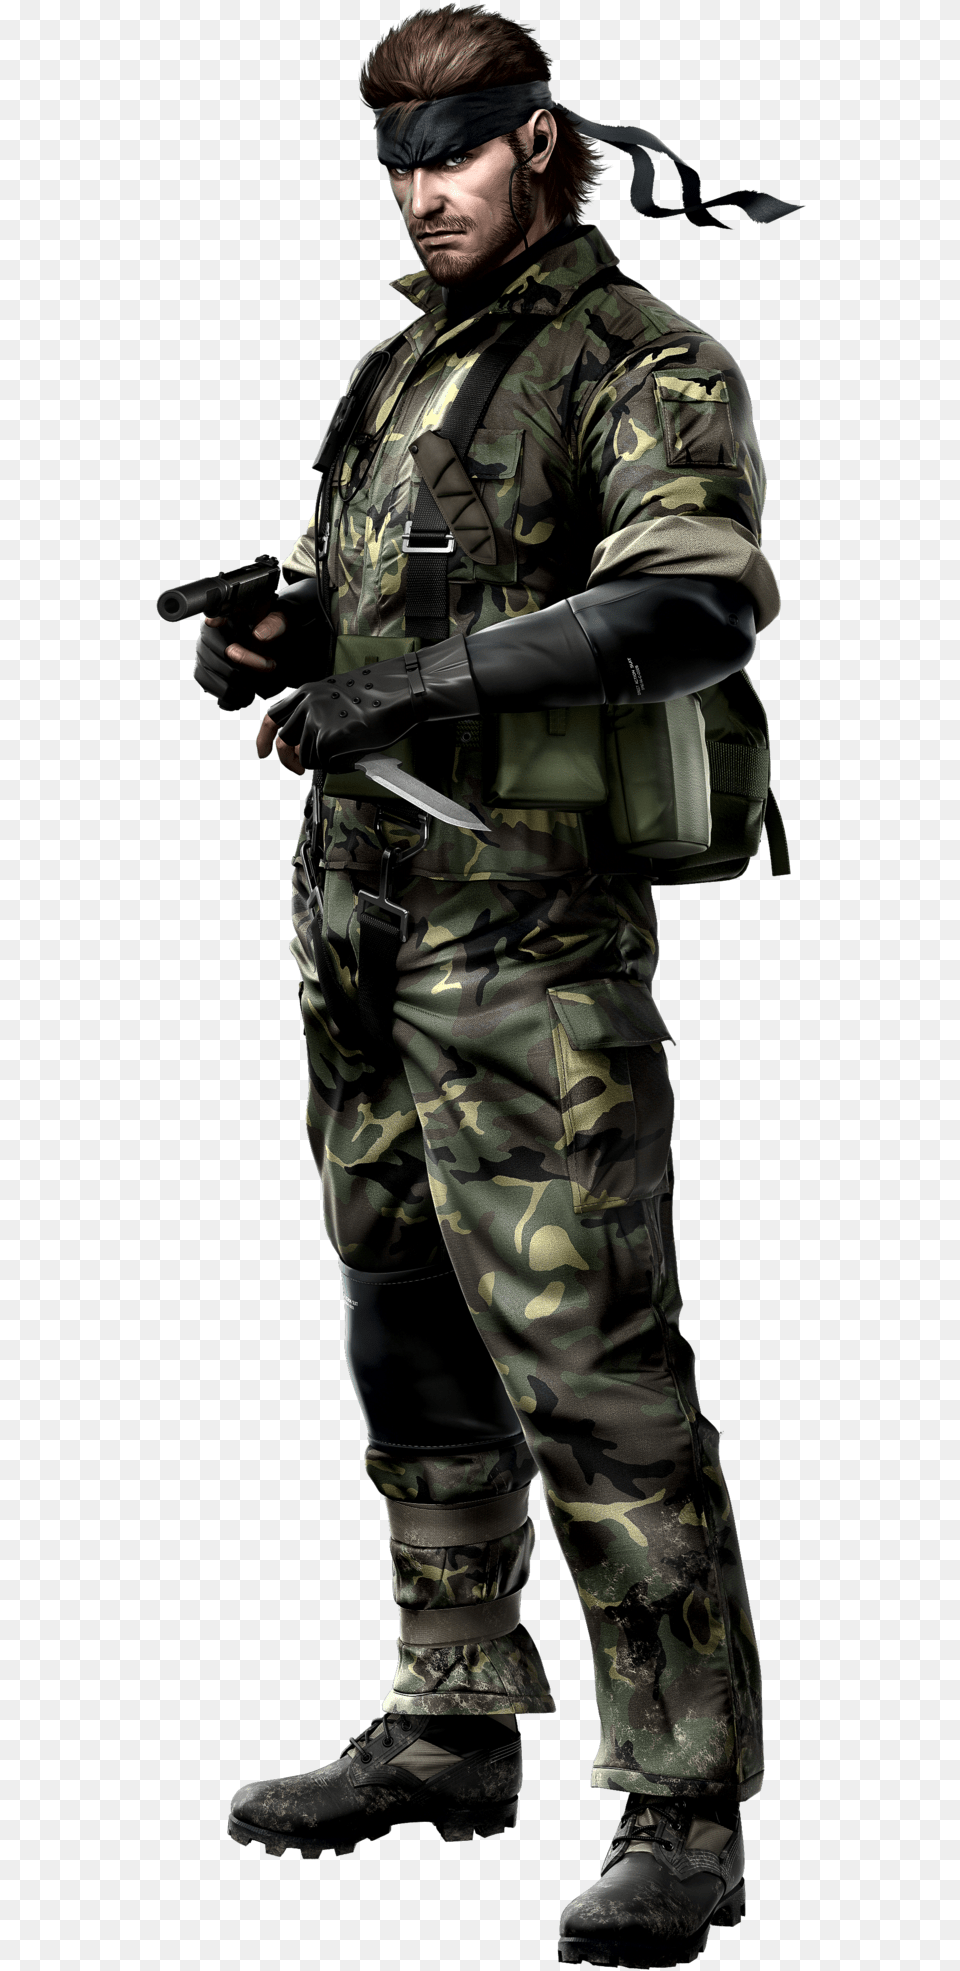 Metal Gear Solid 3 Snake Eater Metal Gear Solid 3 Snake Eater Snake, Military Uniform, Military, Soldier, Person Free Transparent Png